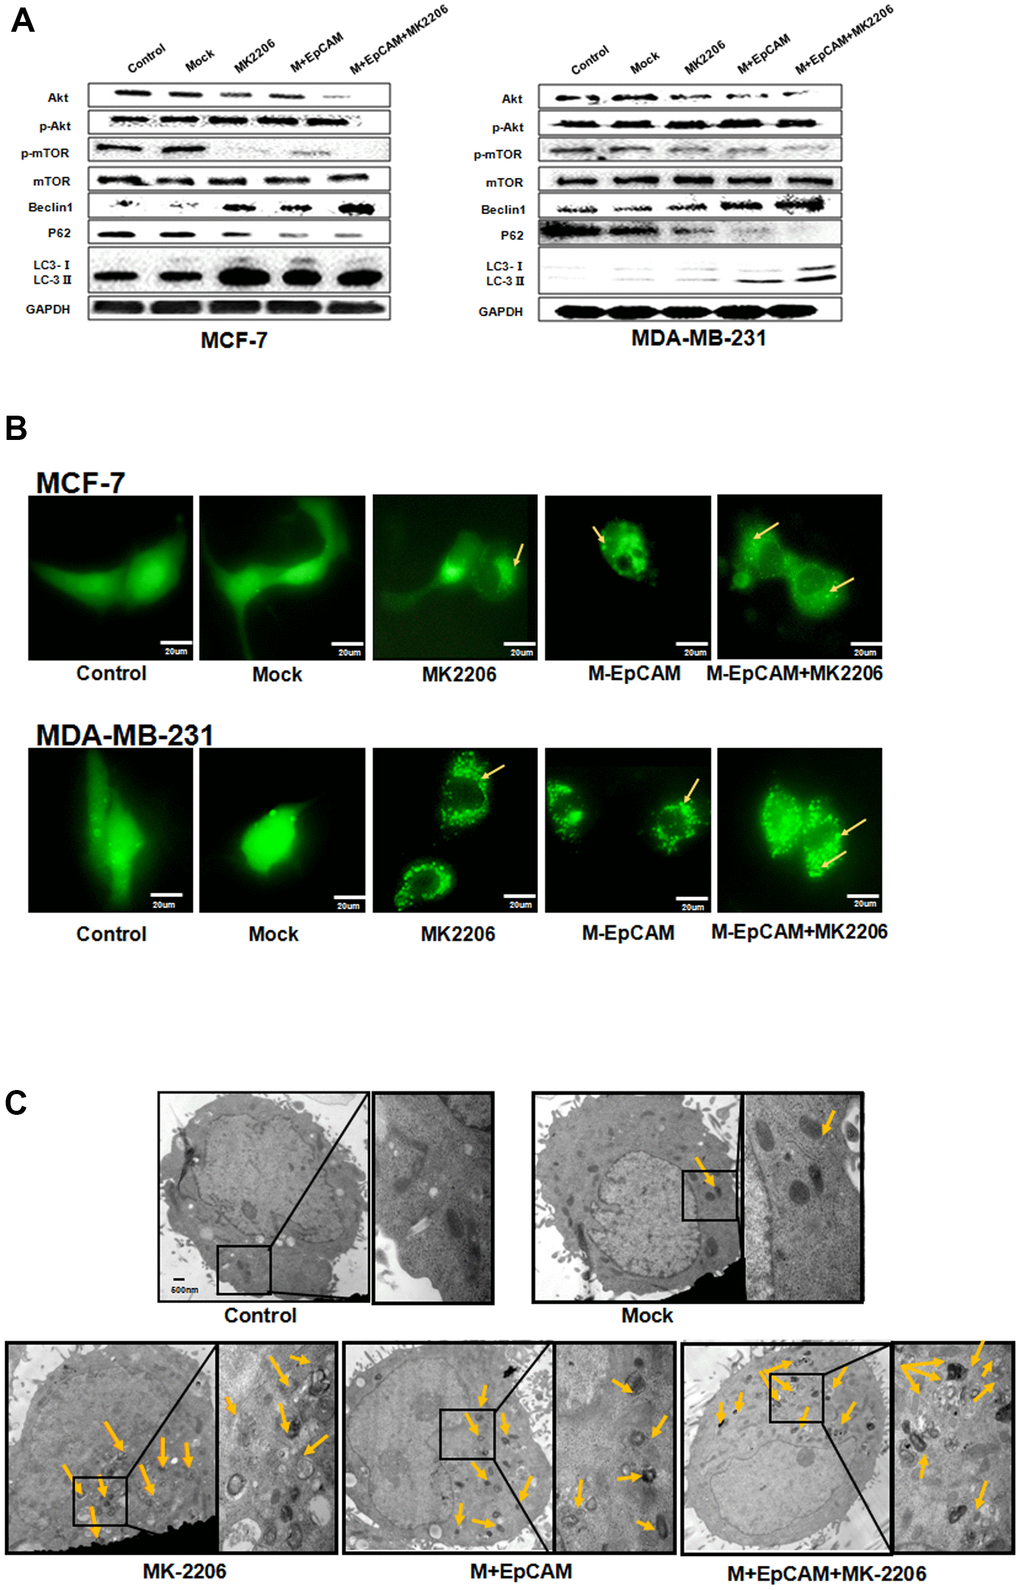 Effects of EpCAM on autophagy via PI3K/AKT/mTOR signaling pathway in MCF-7 and MDA-MB-231 cells. (A) MCF-7 cells and MDA-MB-231 cells were treated with M-EpCAM plasmid and MK2206 (1μM) for 48 h. Whole cell lysates were subjected to western blot to detect the expression of Beclin 1, p62 and the conversion from LC3-I to LC3-II. (B) MCF-7 cells and MDA-MB-231 cells were treated with M-EpCAM plasmid, pGFP-LC3 plasmid and MK2206 (1μM) for 48 hr. Cells were observed under an inverted microscope. Arrow depicted the autophagosome. (C) Representative transmission electron microscopy images depicting ultrastructures of MCF-7 cells which were transfected with M-EpCAM plasmid and MK2206 (1μM) for 48 h.